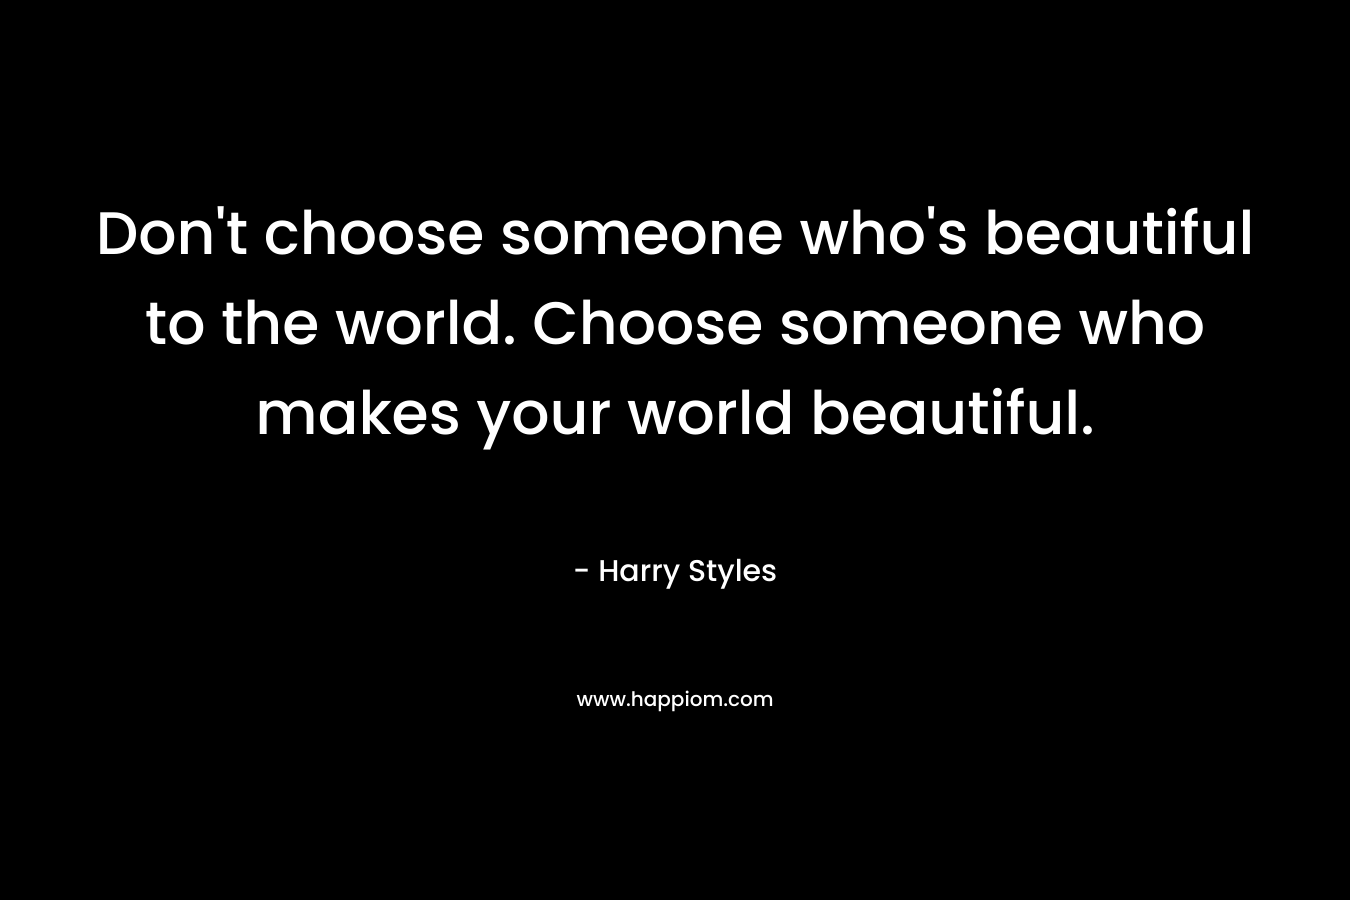 Don’t choose someone who’s beautiful to the world. Choose someone who makes your world beautiful. – Harry Styles